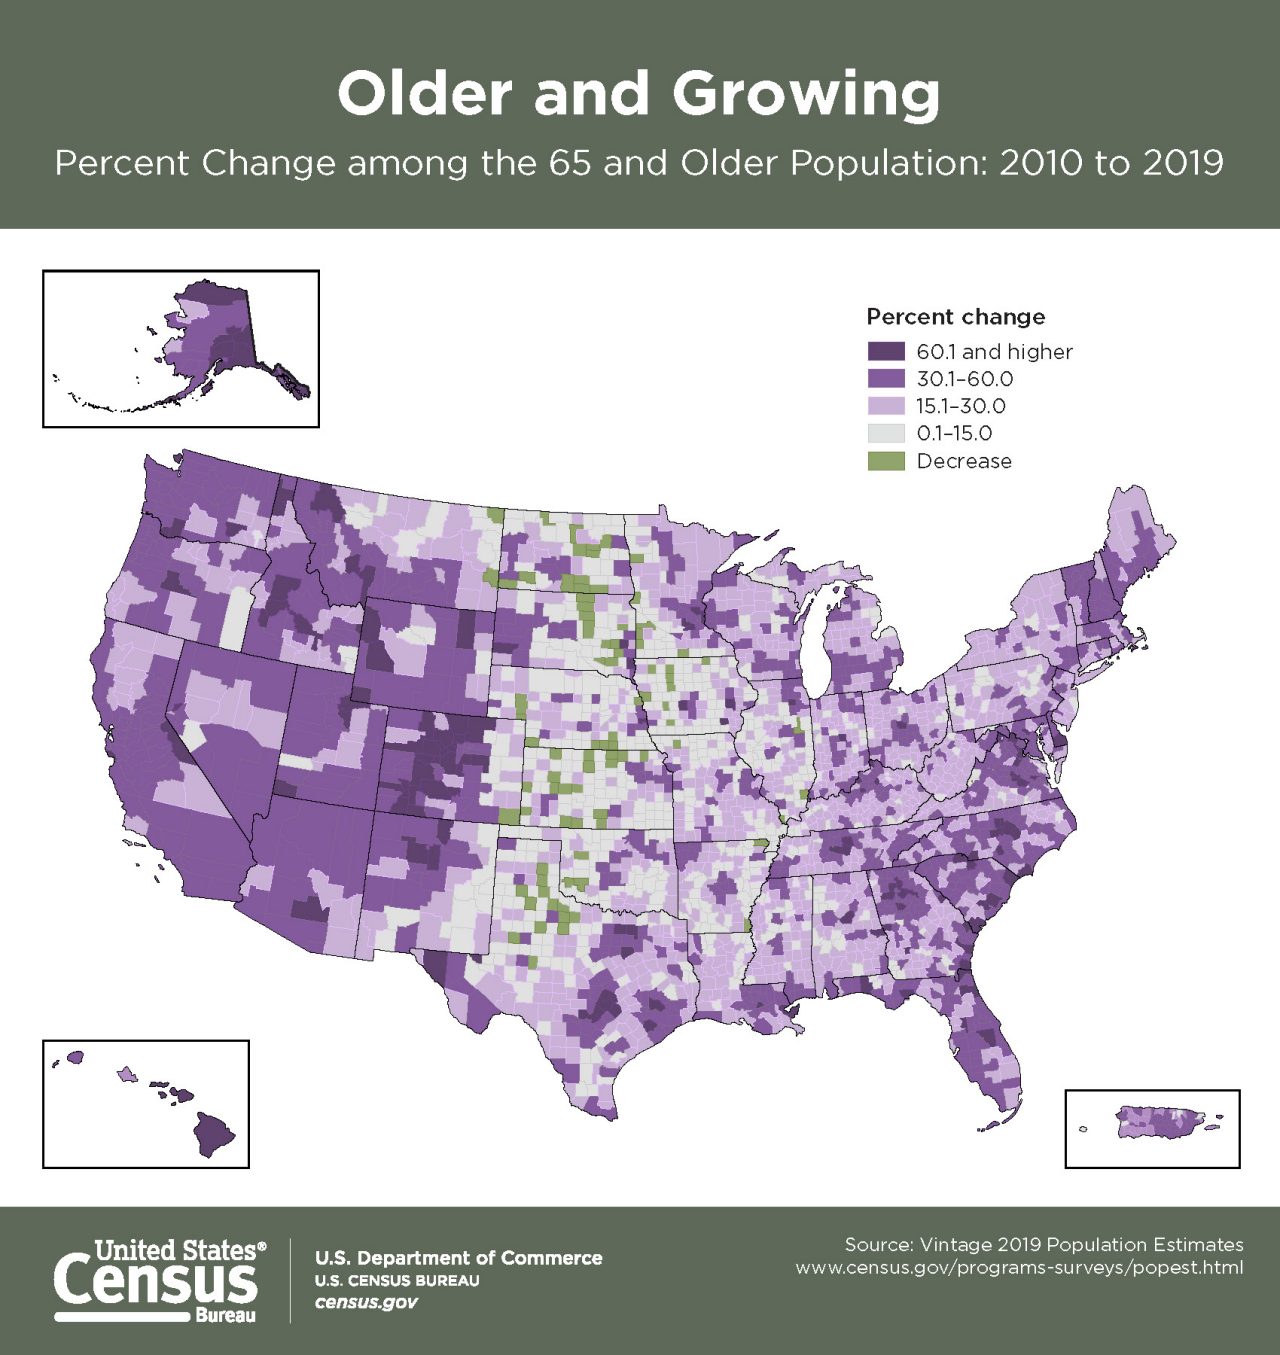 Older and Growing - Percent Change among the 65 and Older Population: 2010 to 2019